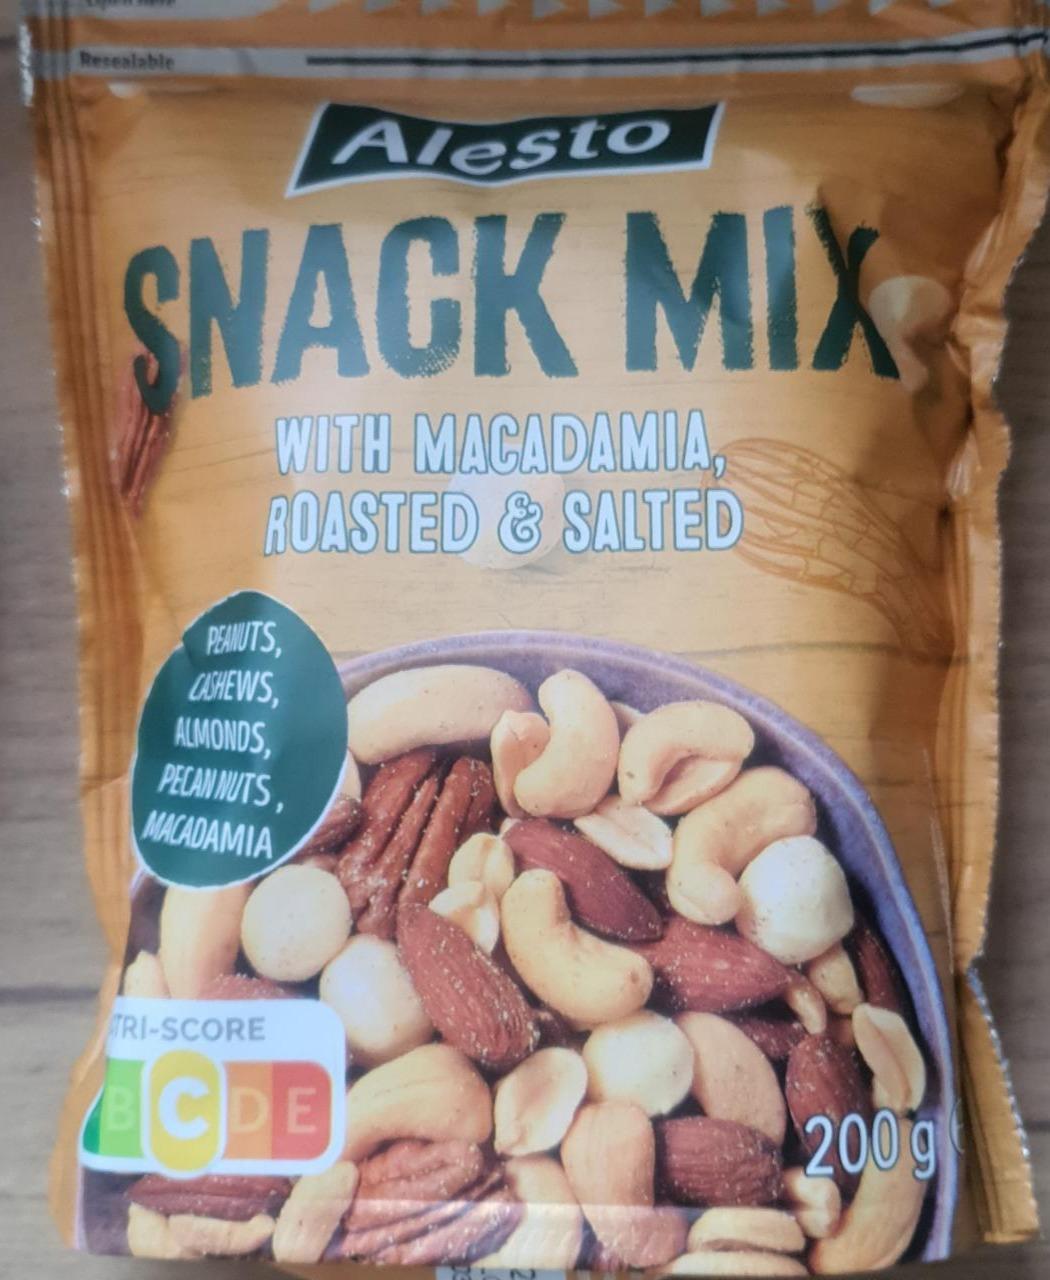 Fotografie - Snack Mix with Macadamia, Roasted & Salted Alesto